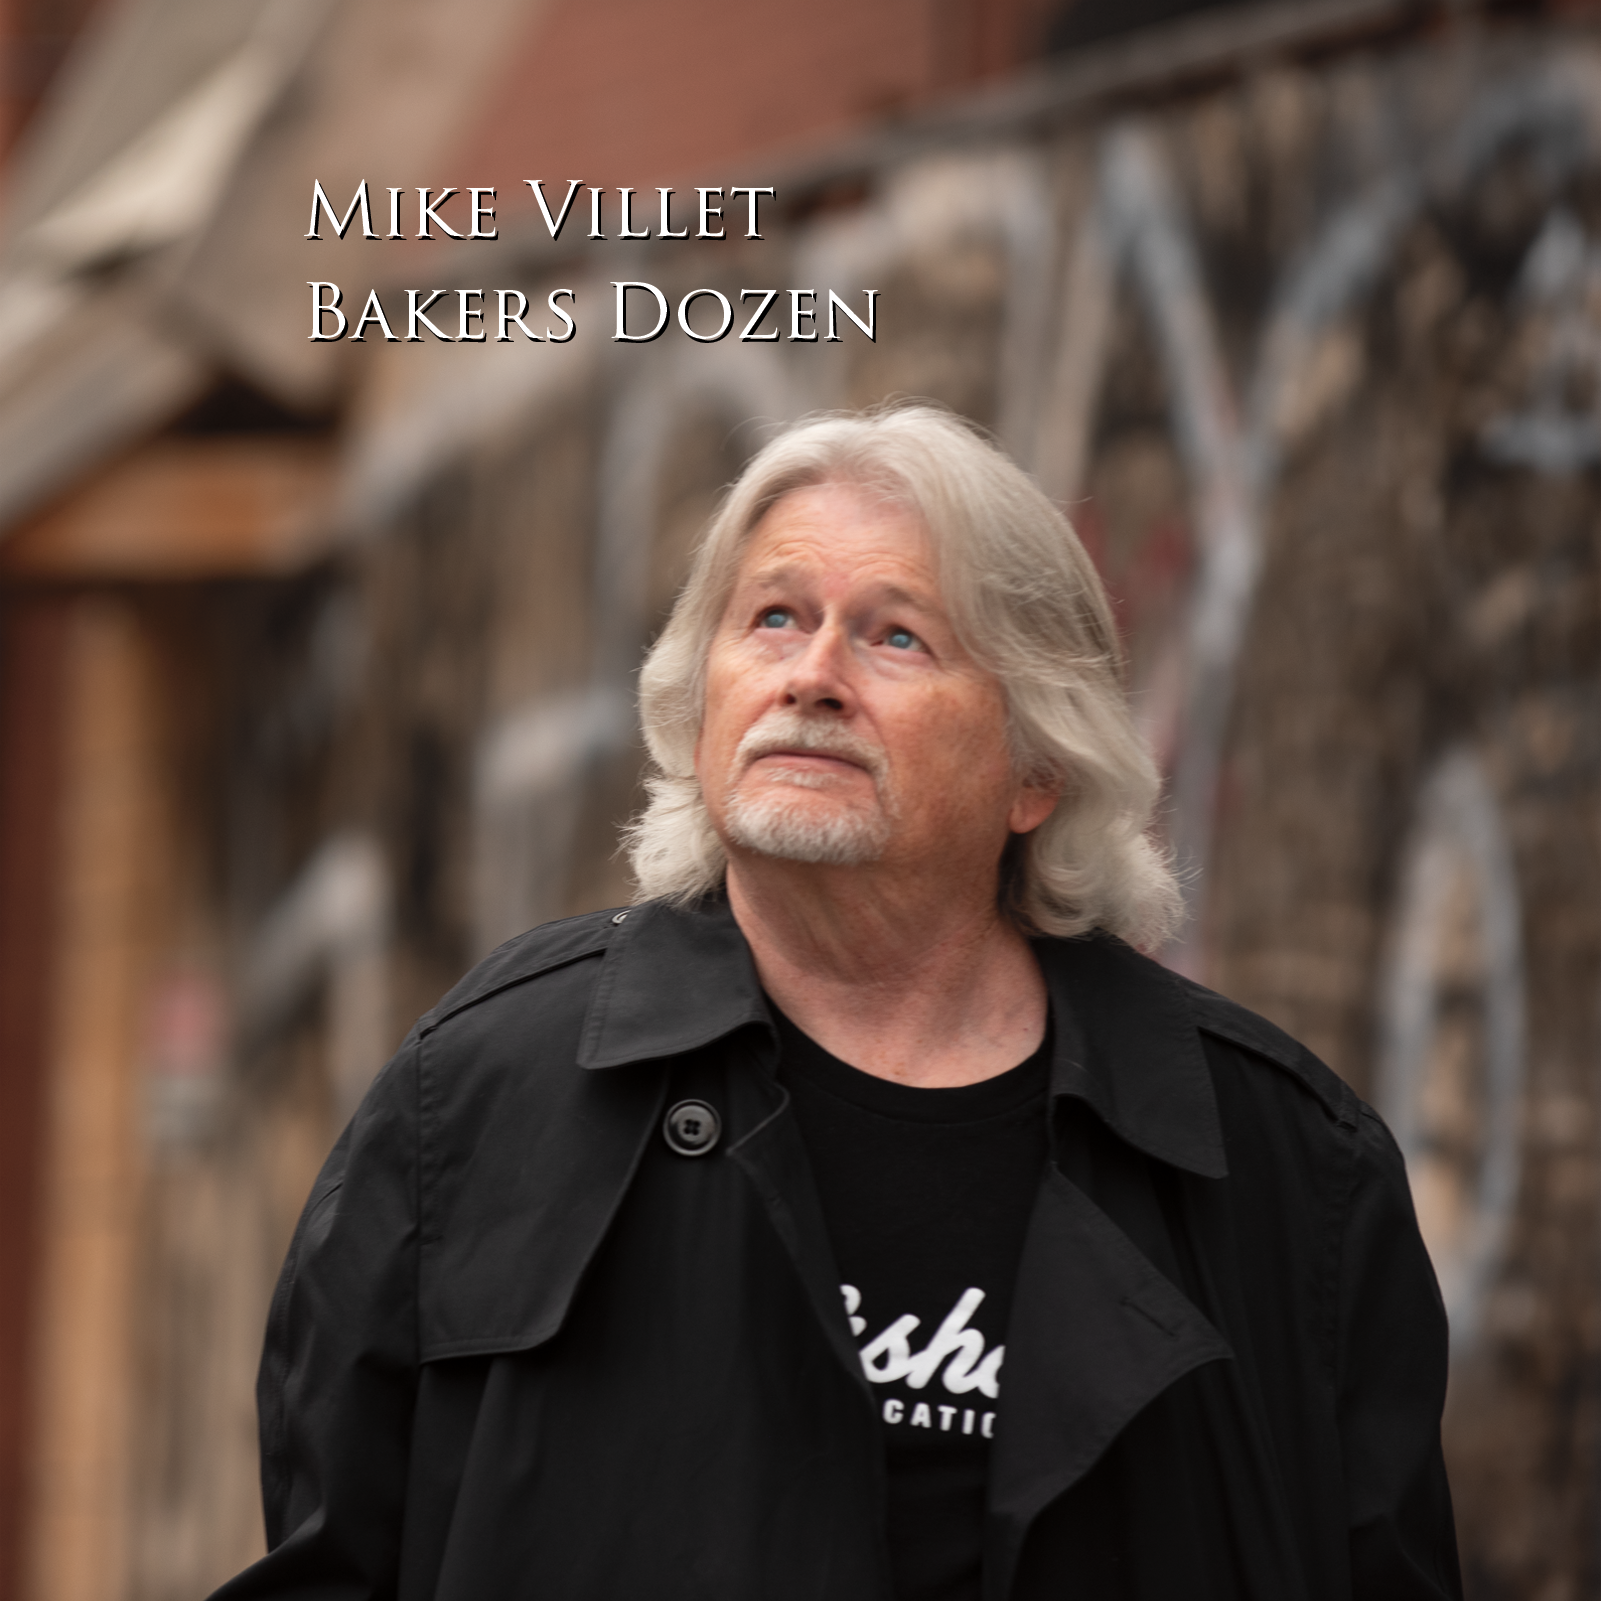 Gifted Guitarist-Songwriter Conjures Original Rhythms and Lyricism: Mike Villet Releases New Album